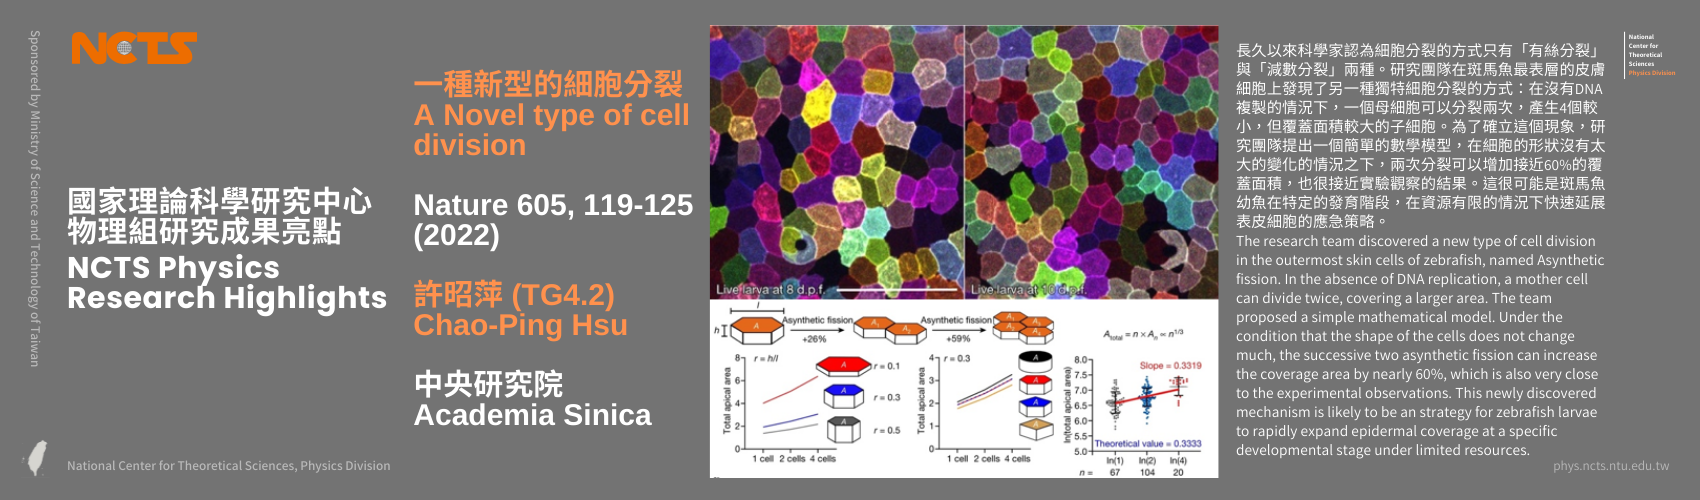 [NCTS Physics Research Highlights] Chao-Ping Hsu 'A Novel type of cell division', Nature 605, 119-125 (2022)